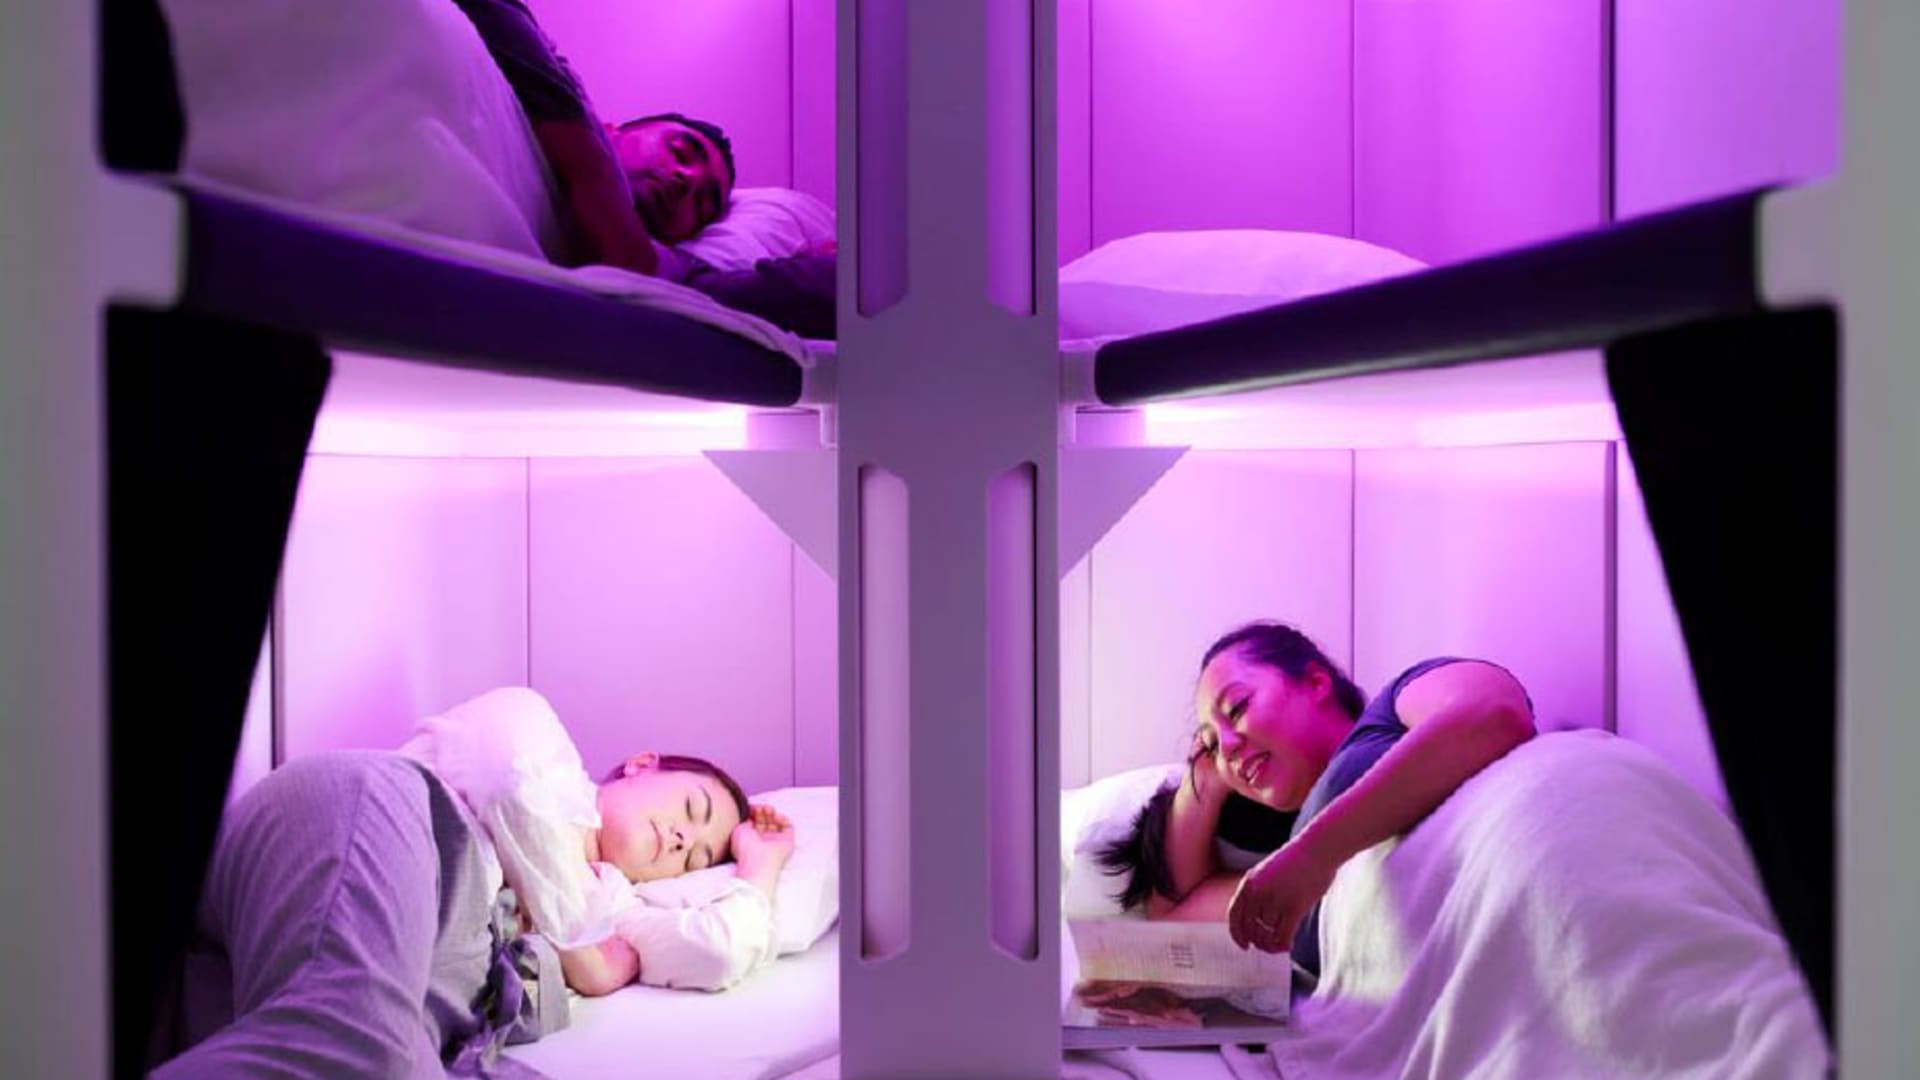 Economy passengers could soon lie down on airplanes—meet the airline that's doing it first